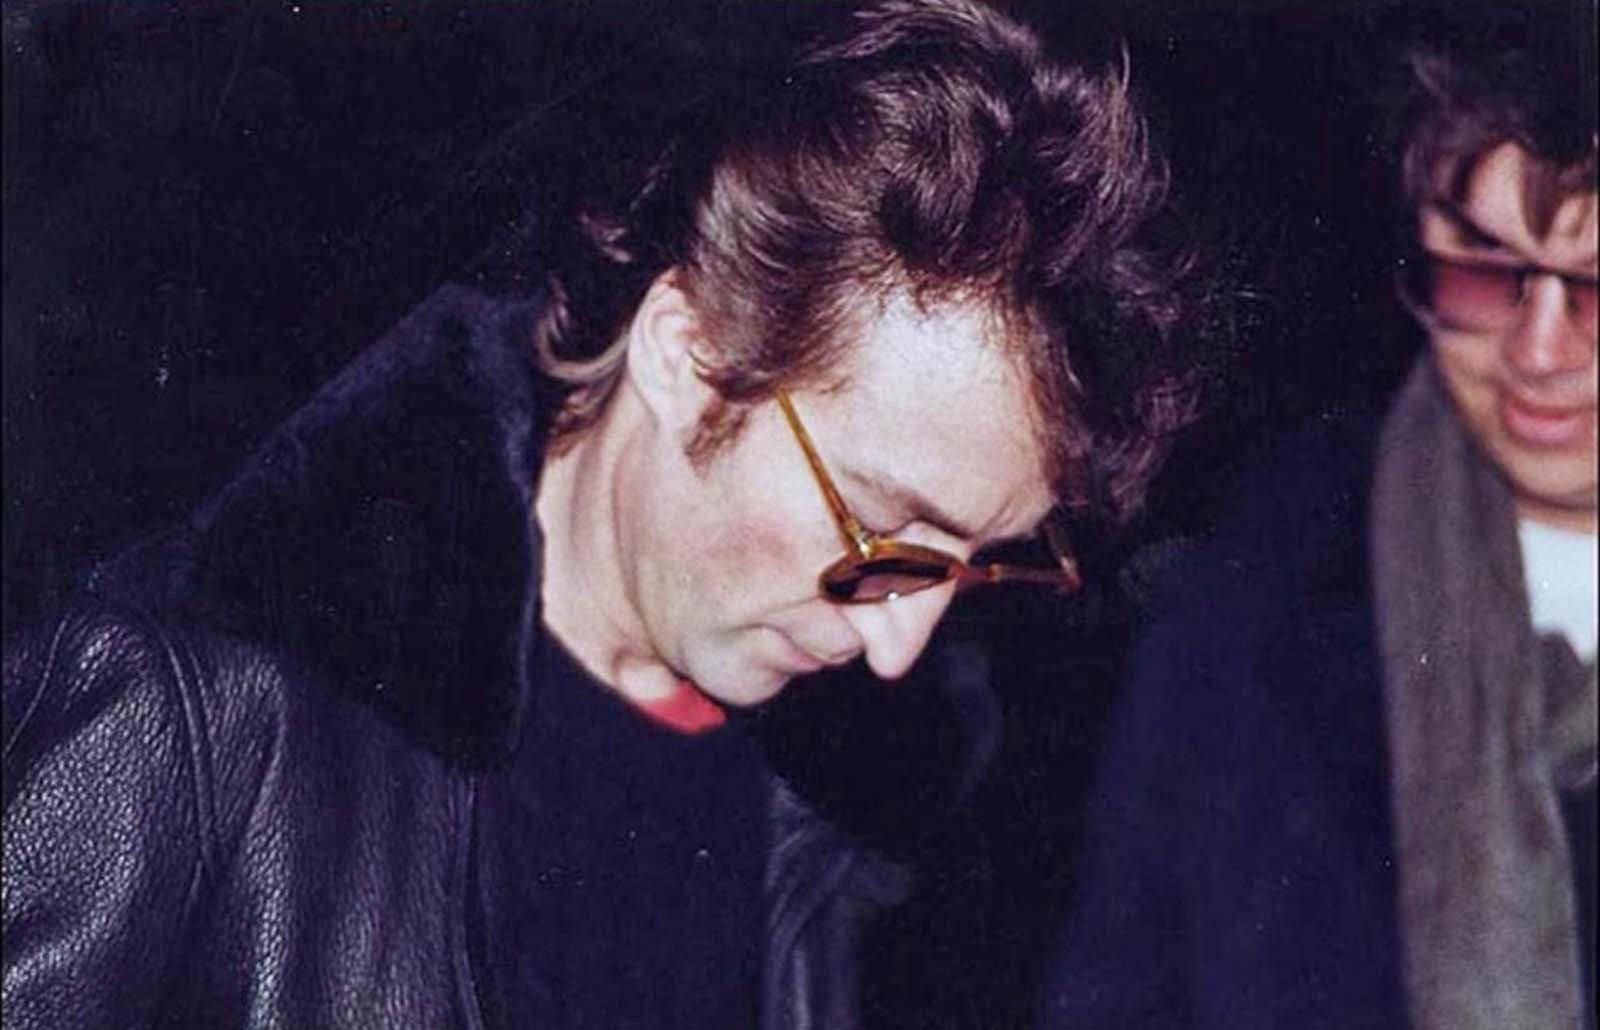 John lennon happily signs a very large fans autograph, 1980